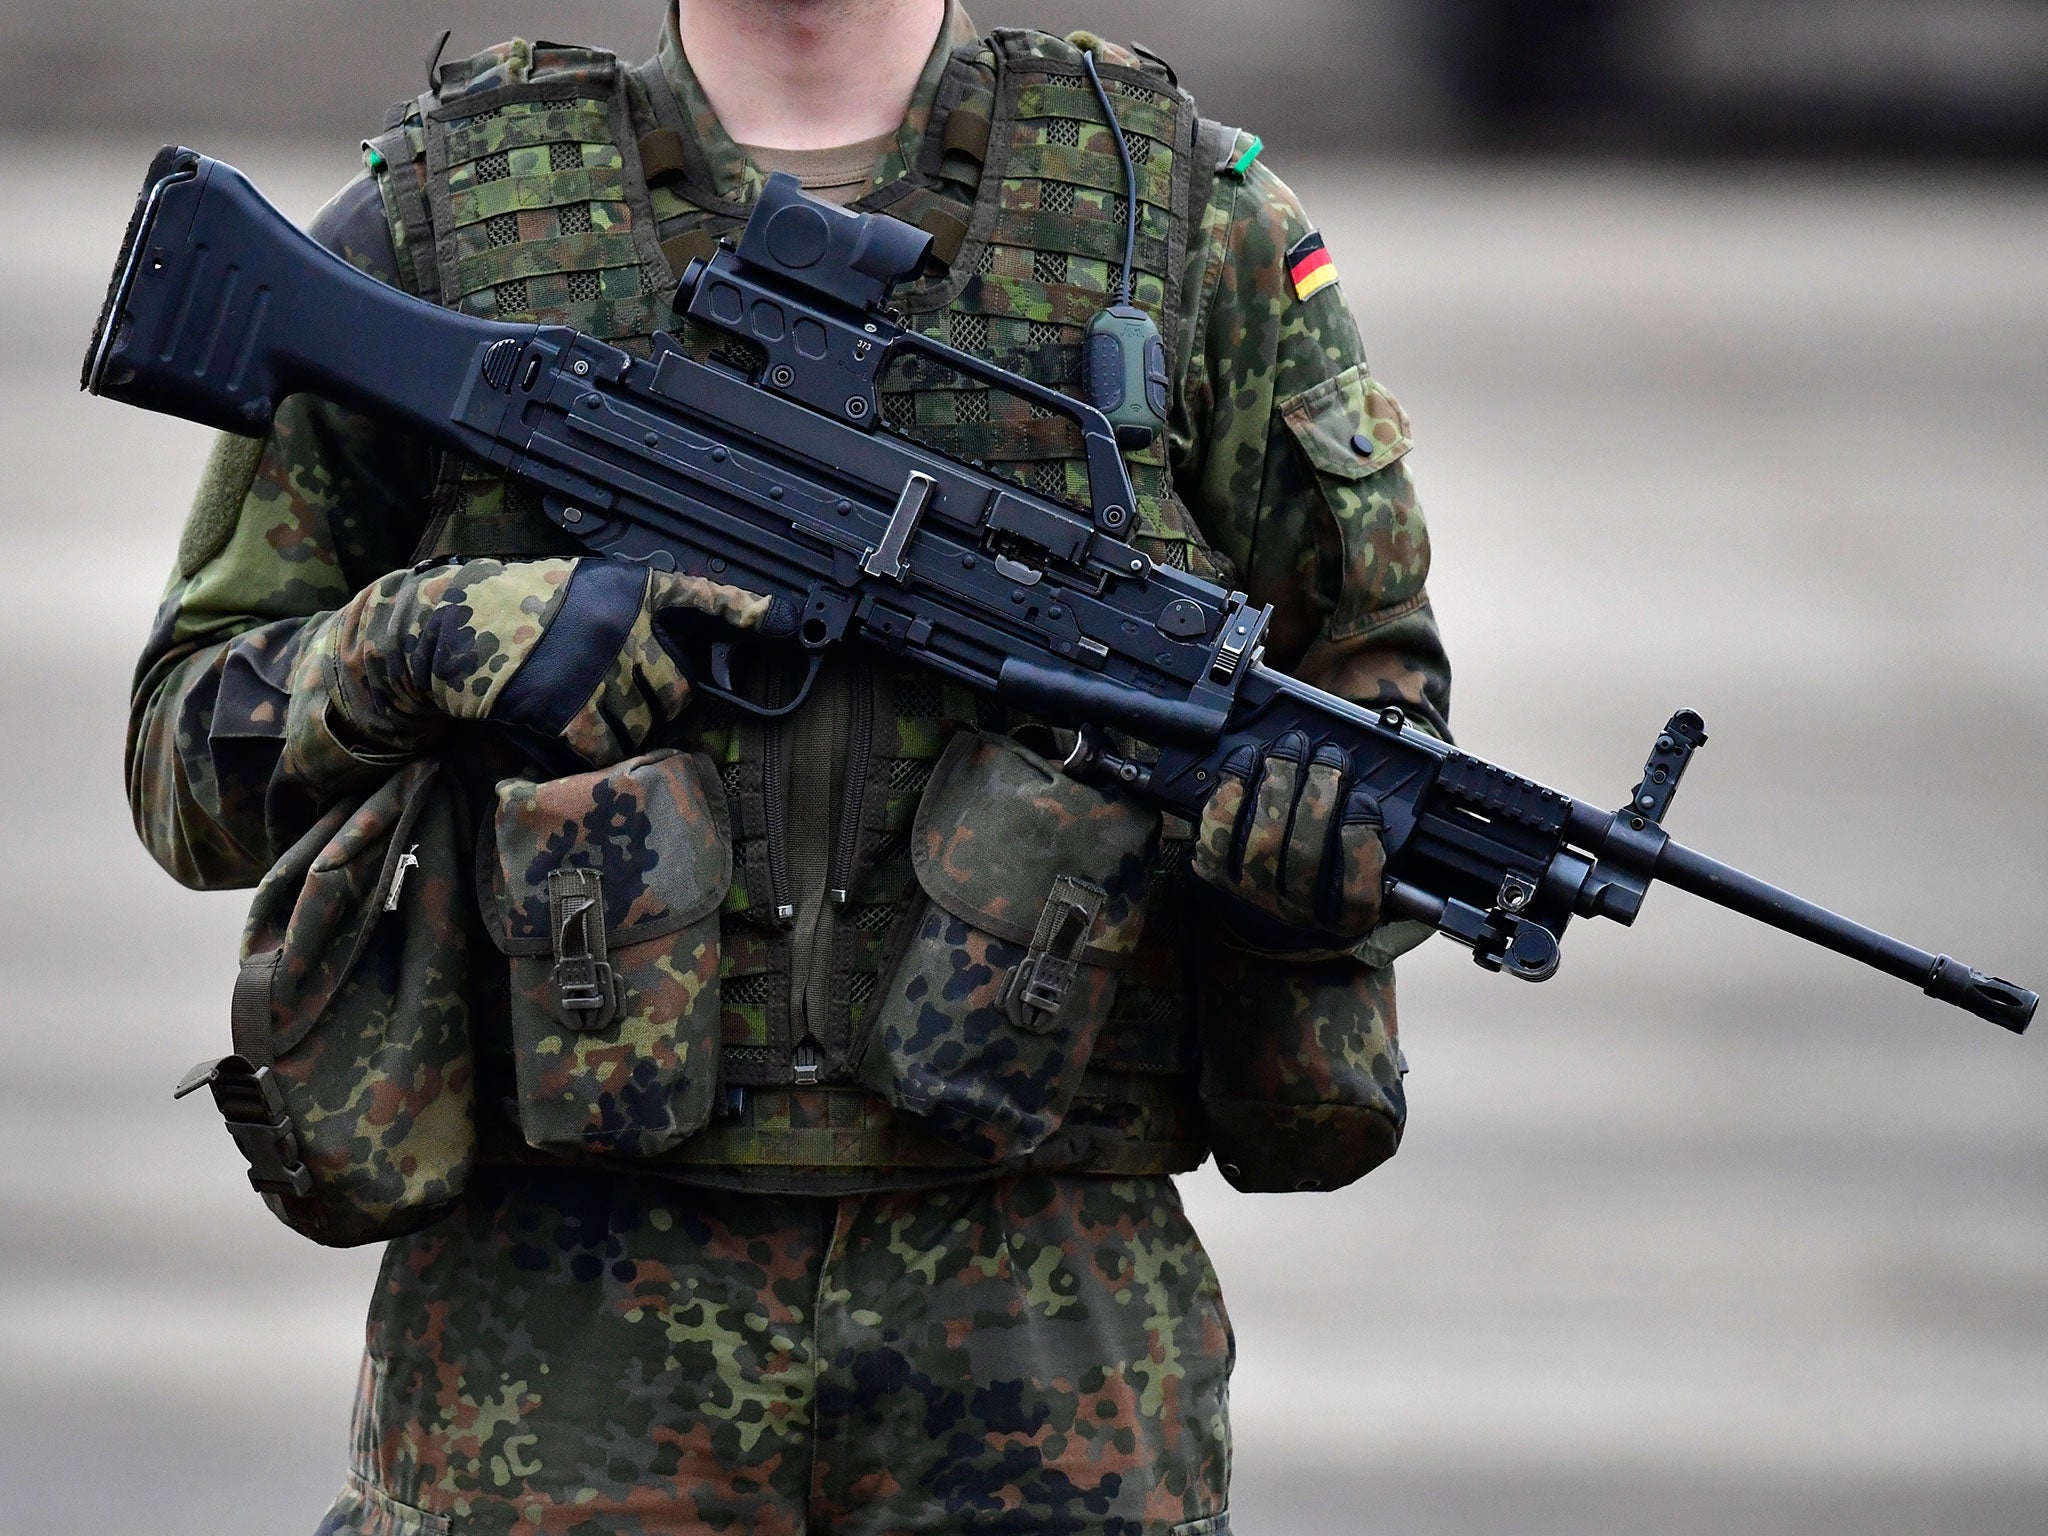 The plot has prompted fears of a wider neo-Nazi network within the Bundeswehr